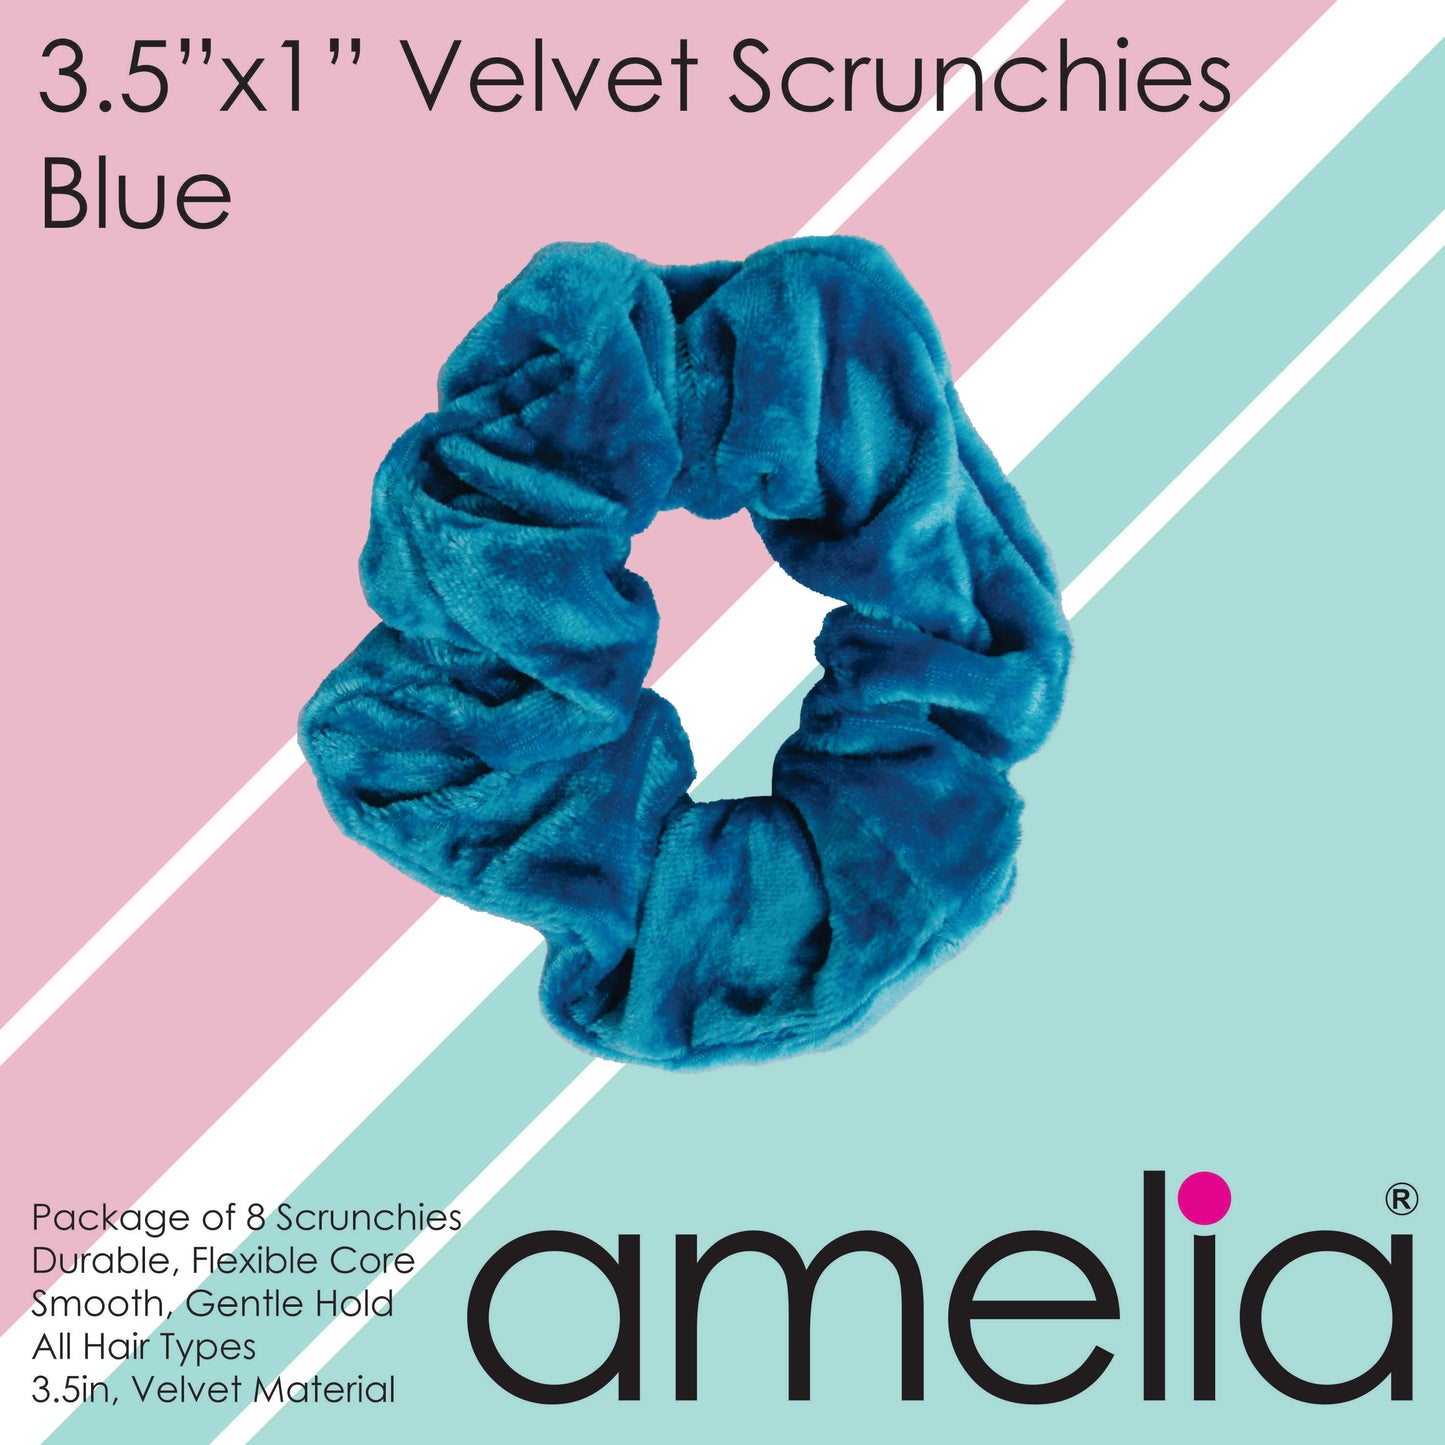 Amelia Beauty Products, Blue Velvet Velvet Scrunchies, 3.5in Diameter, Gentle on Hair, Strong Hold, No Snag, No Dents or Creases. 8 Pack